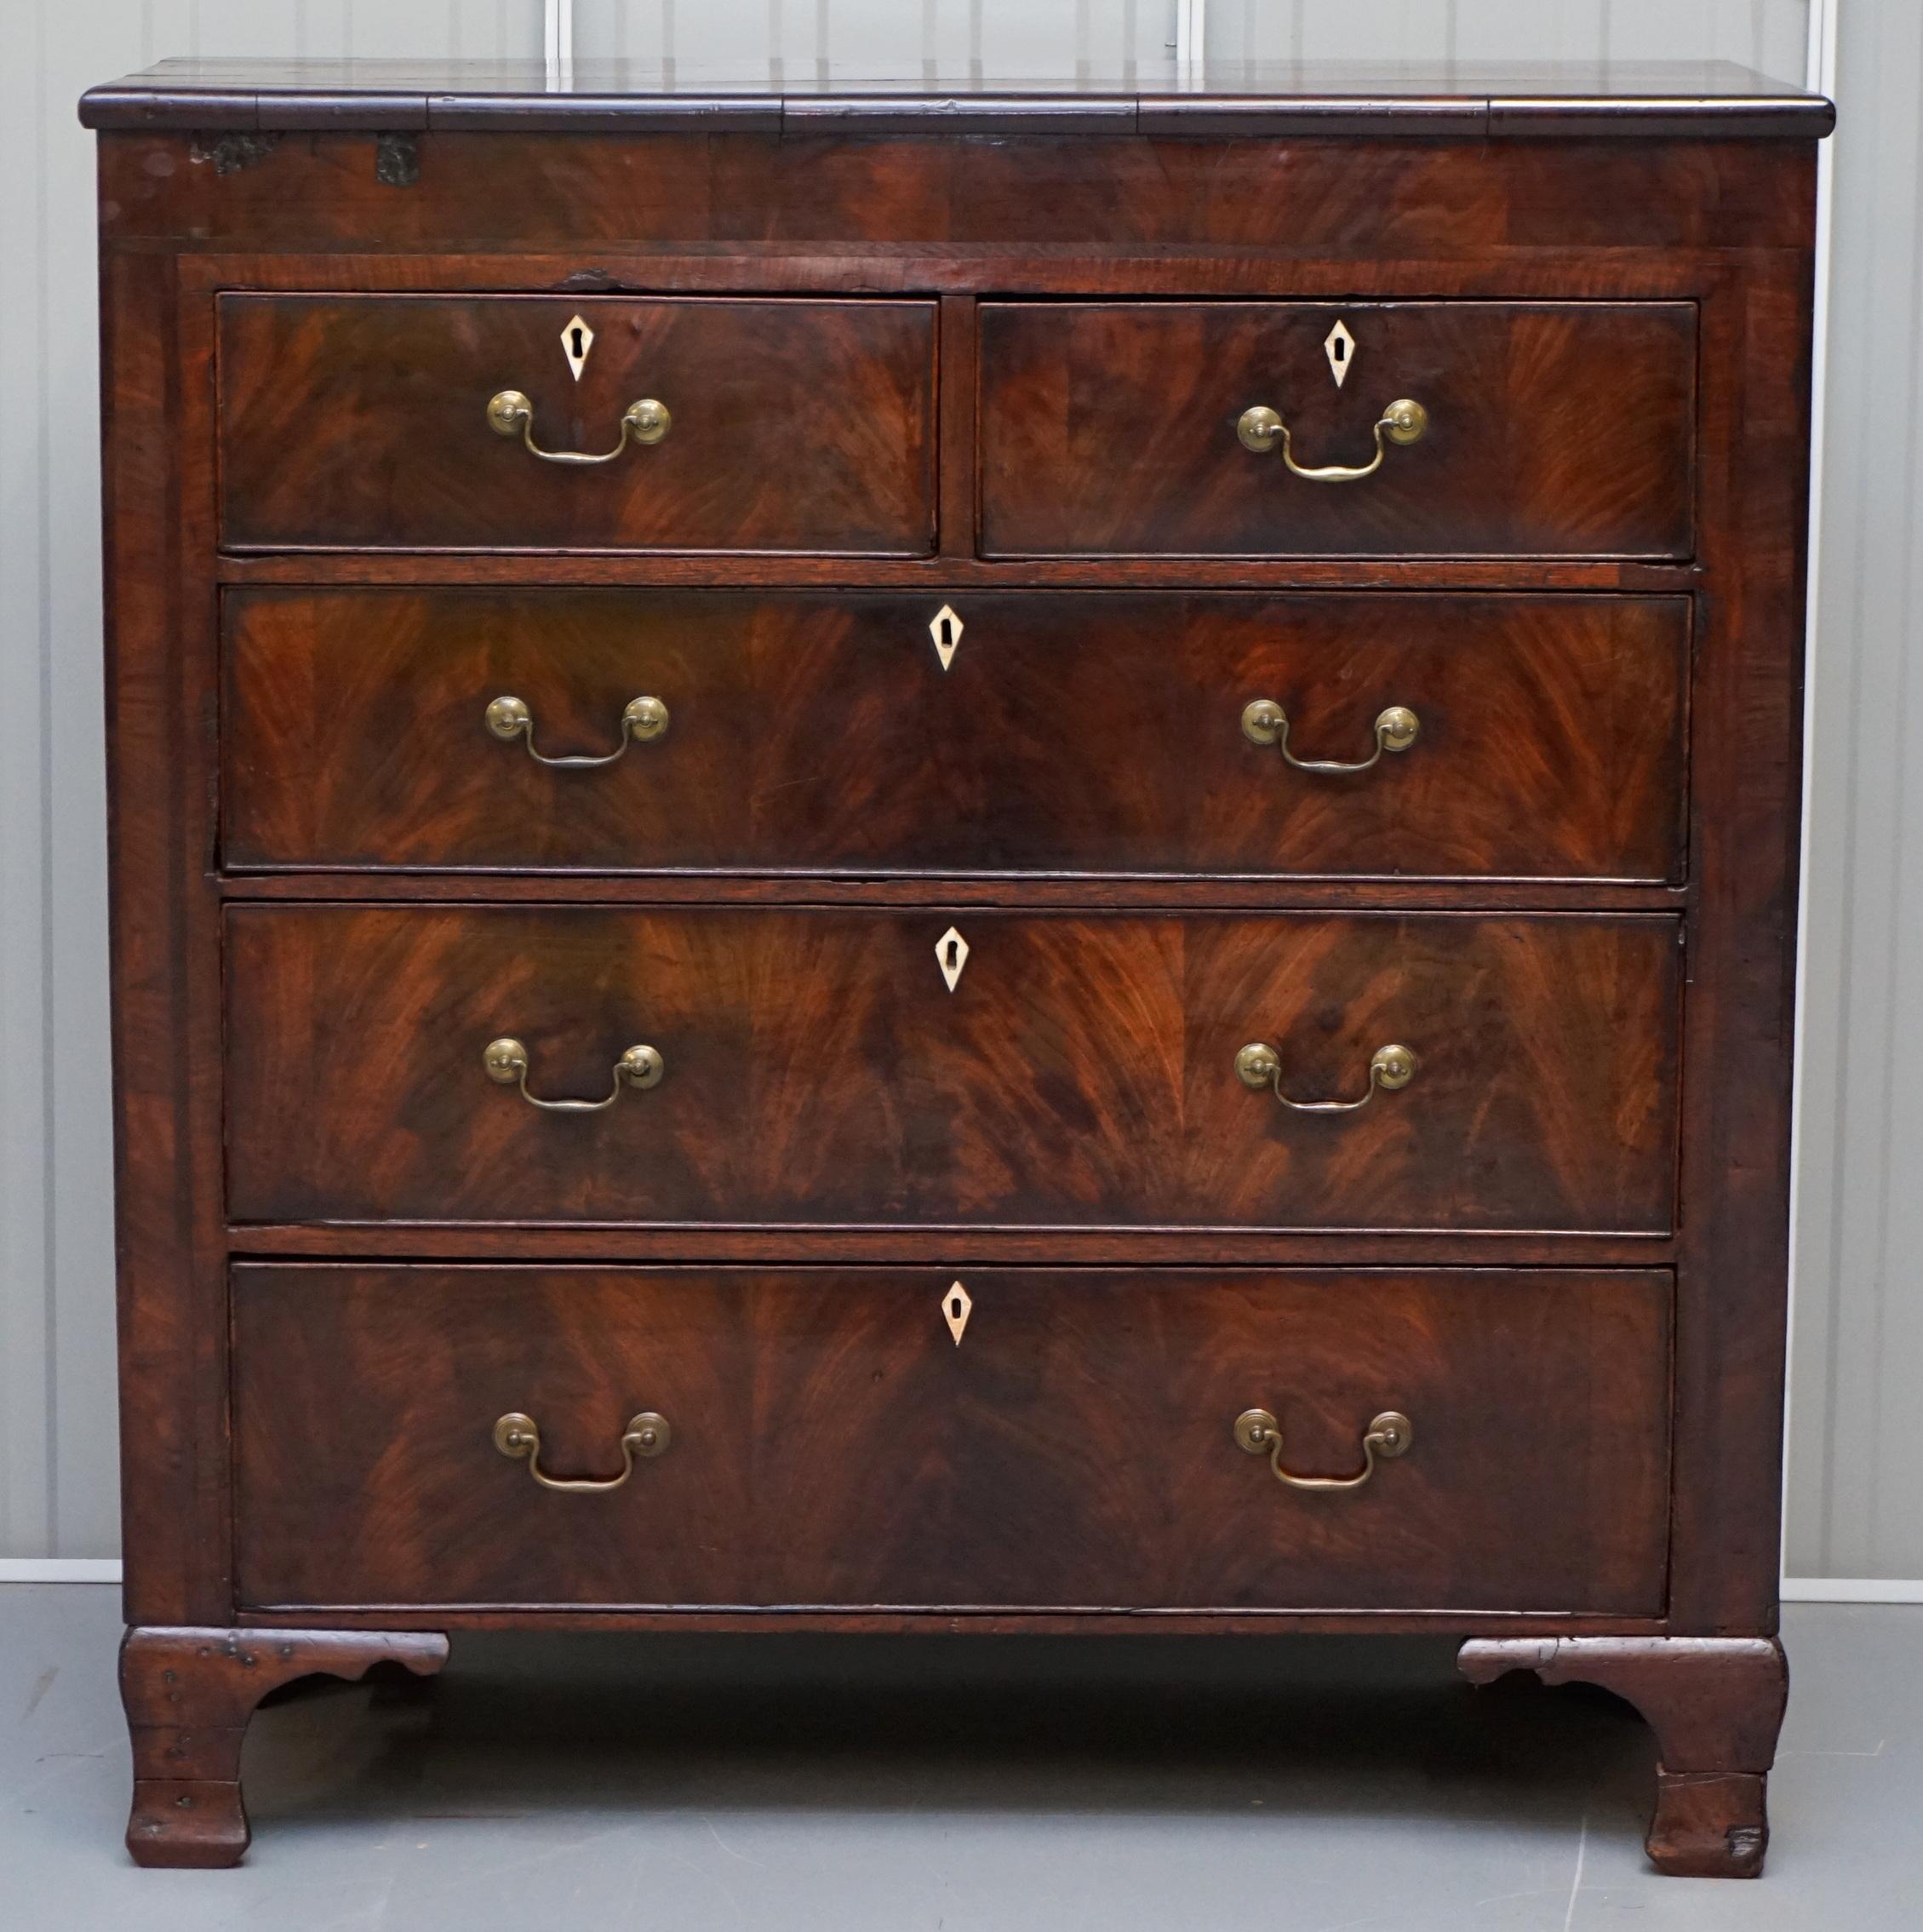 We are delighted to offer for sale this very old period patina Georgian circa 1800 chest of drawers

A highly original piece with a glorious timber colour. These drawers are large and offer huge amounts of storage, they are a two over three